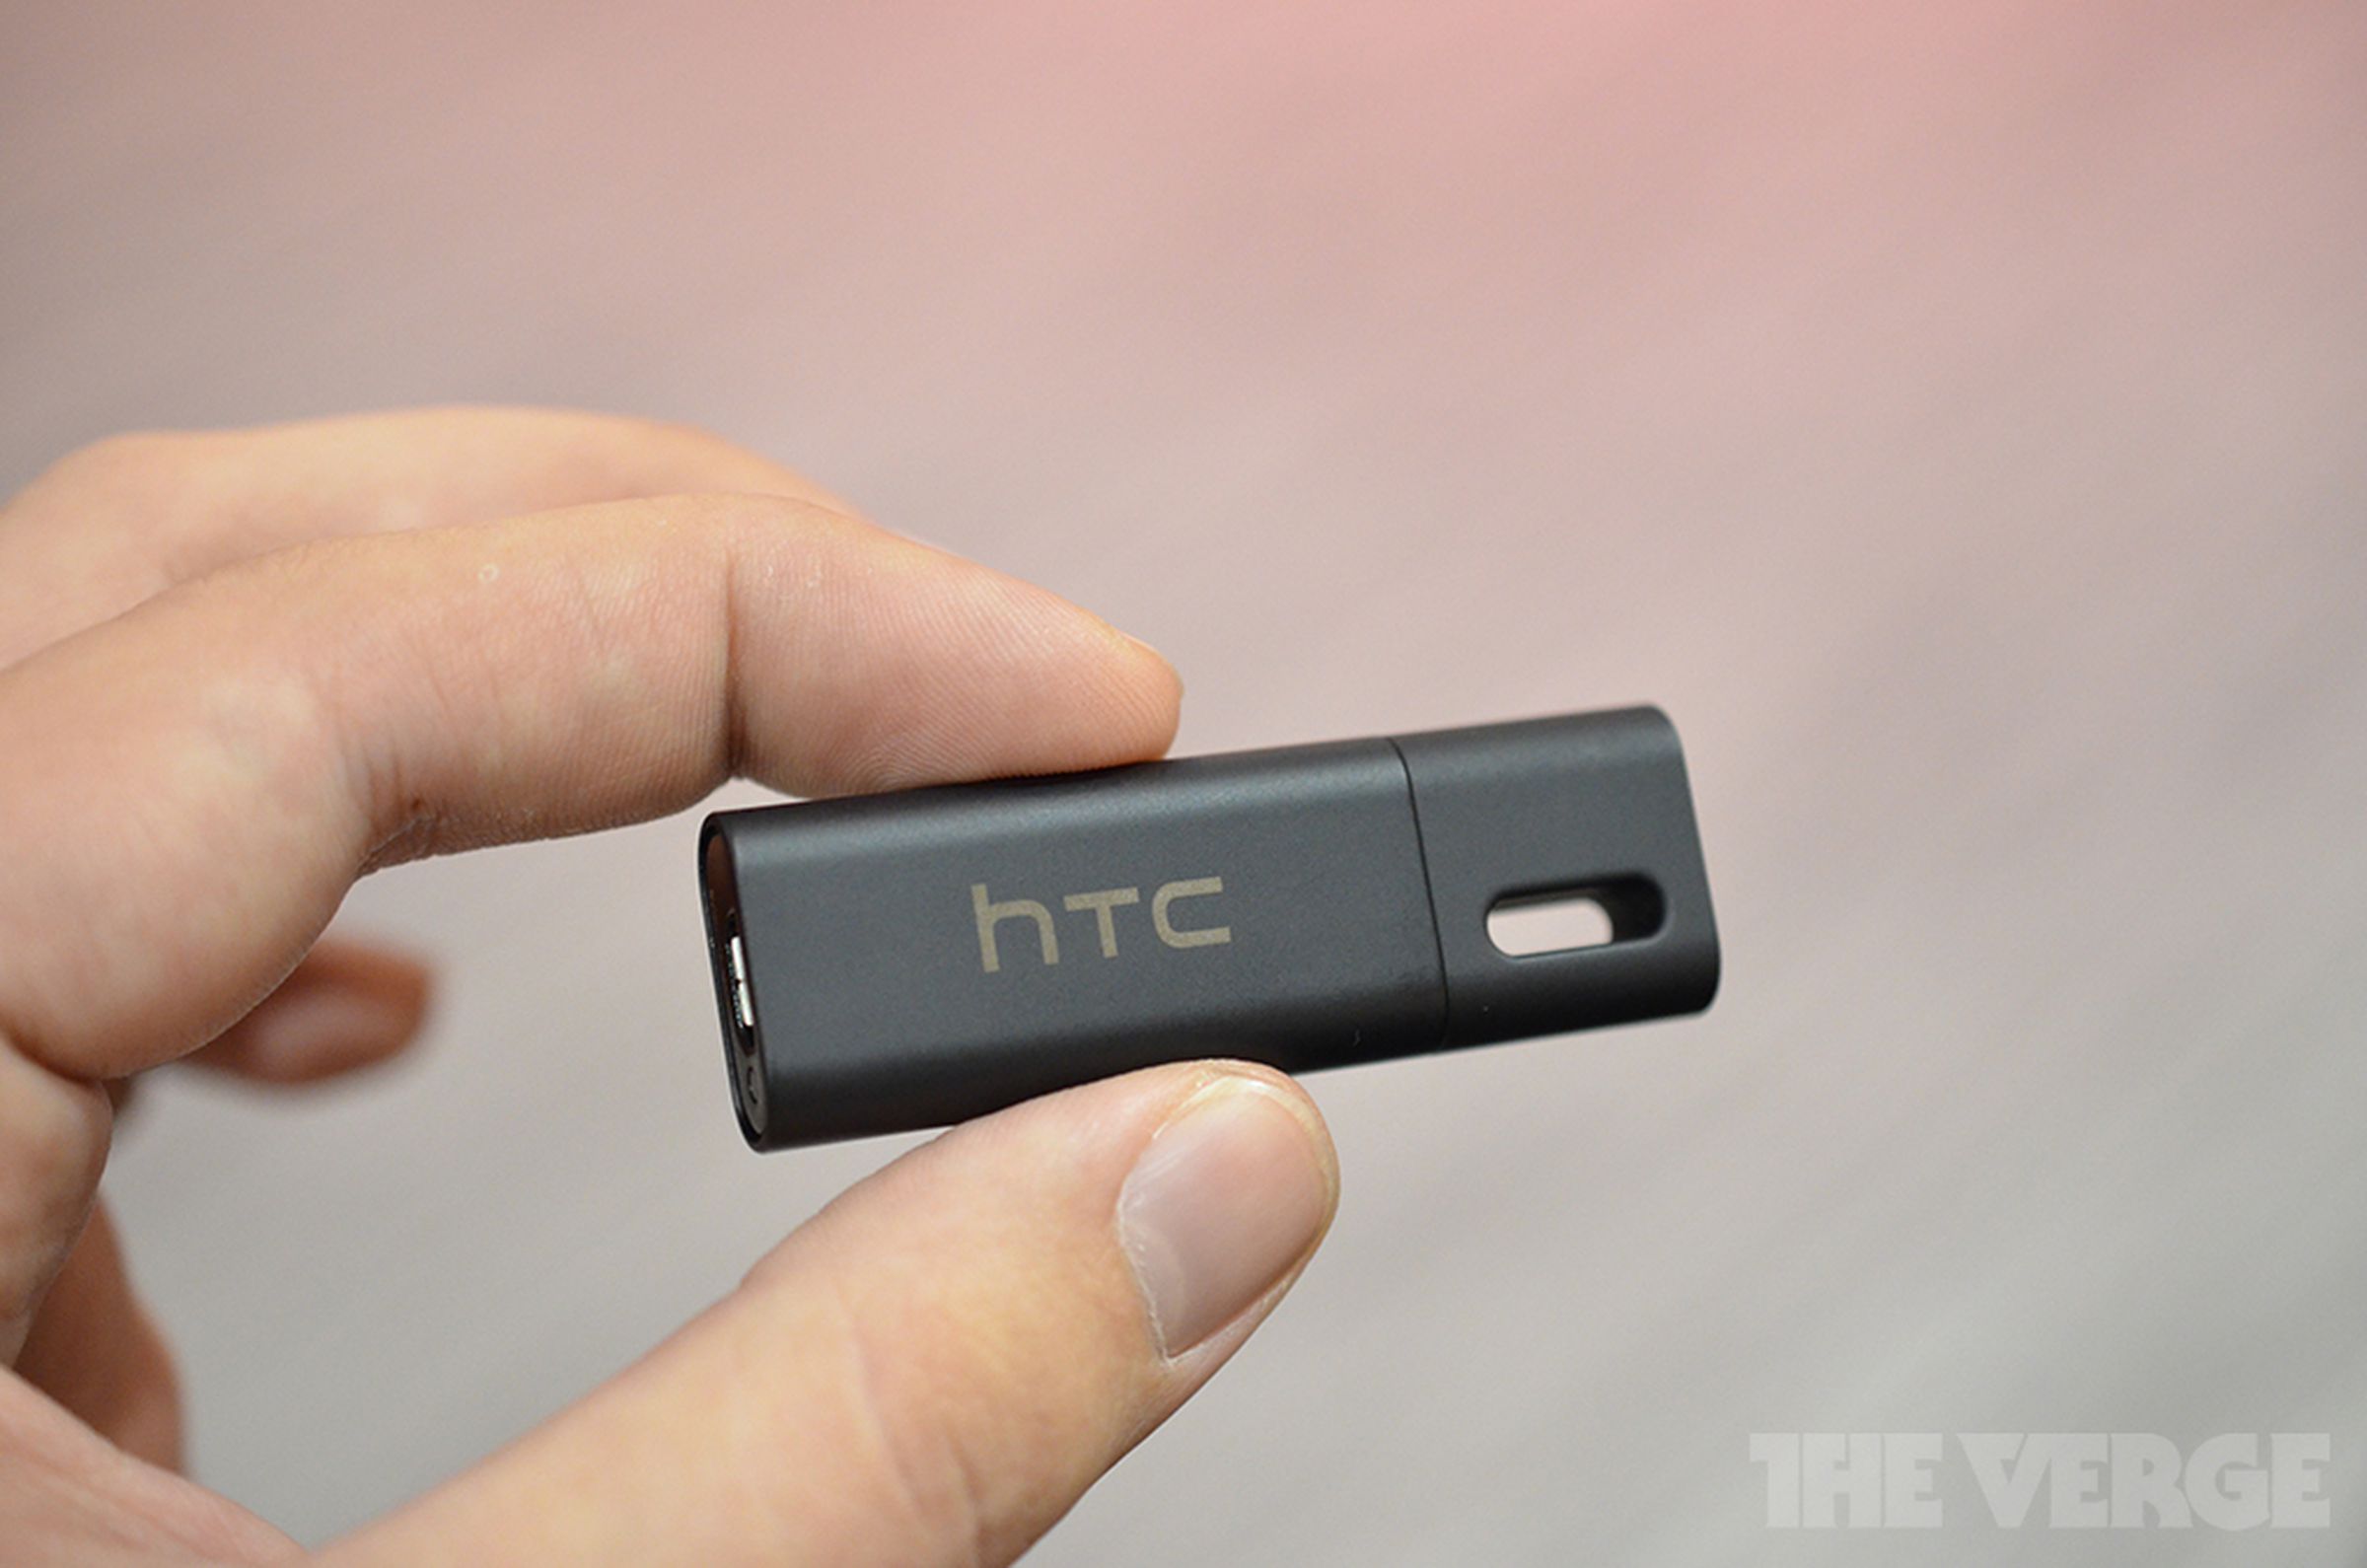 HTC Car StereoClip (Aux) hands-on pictures